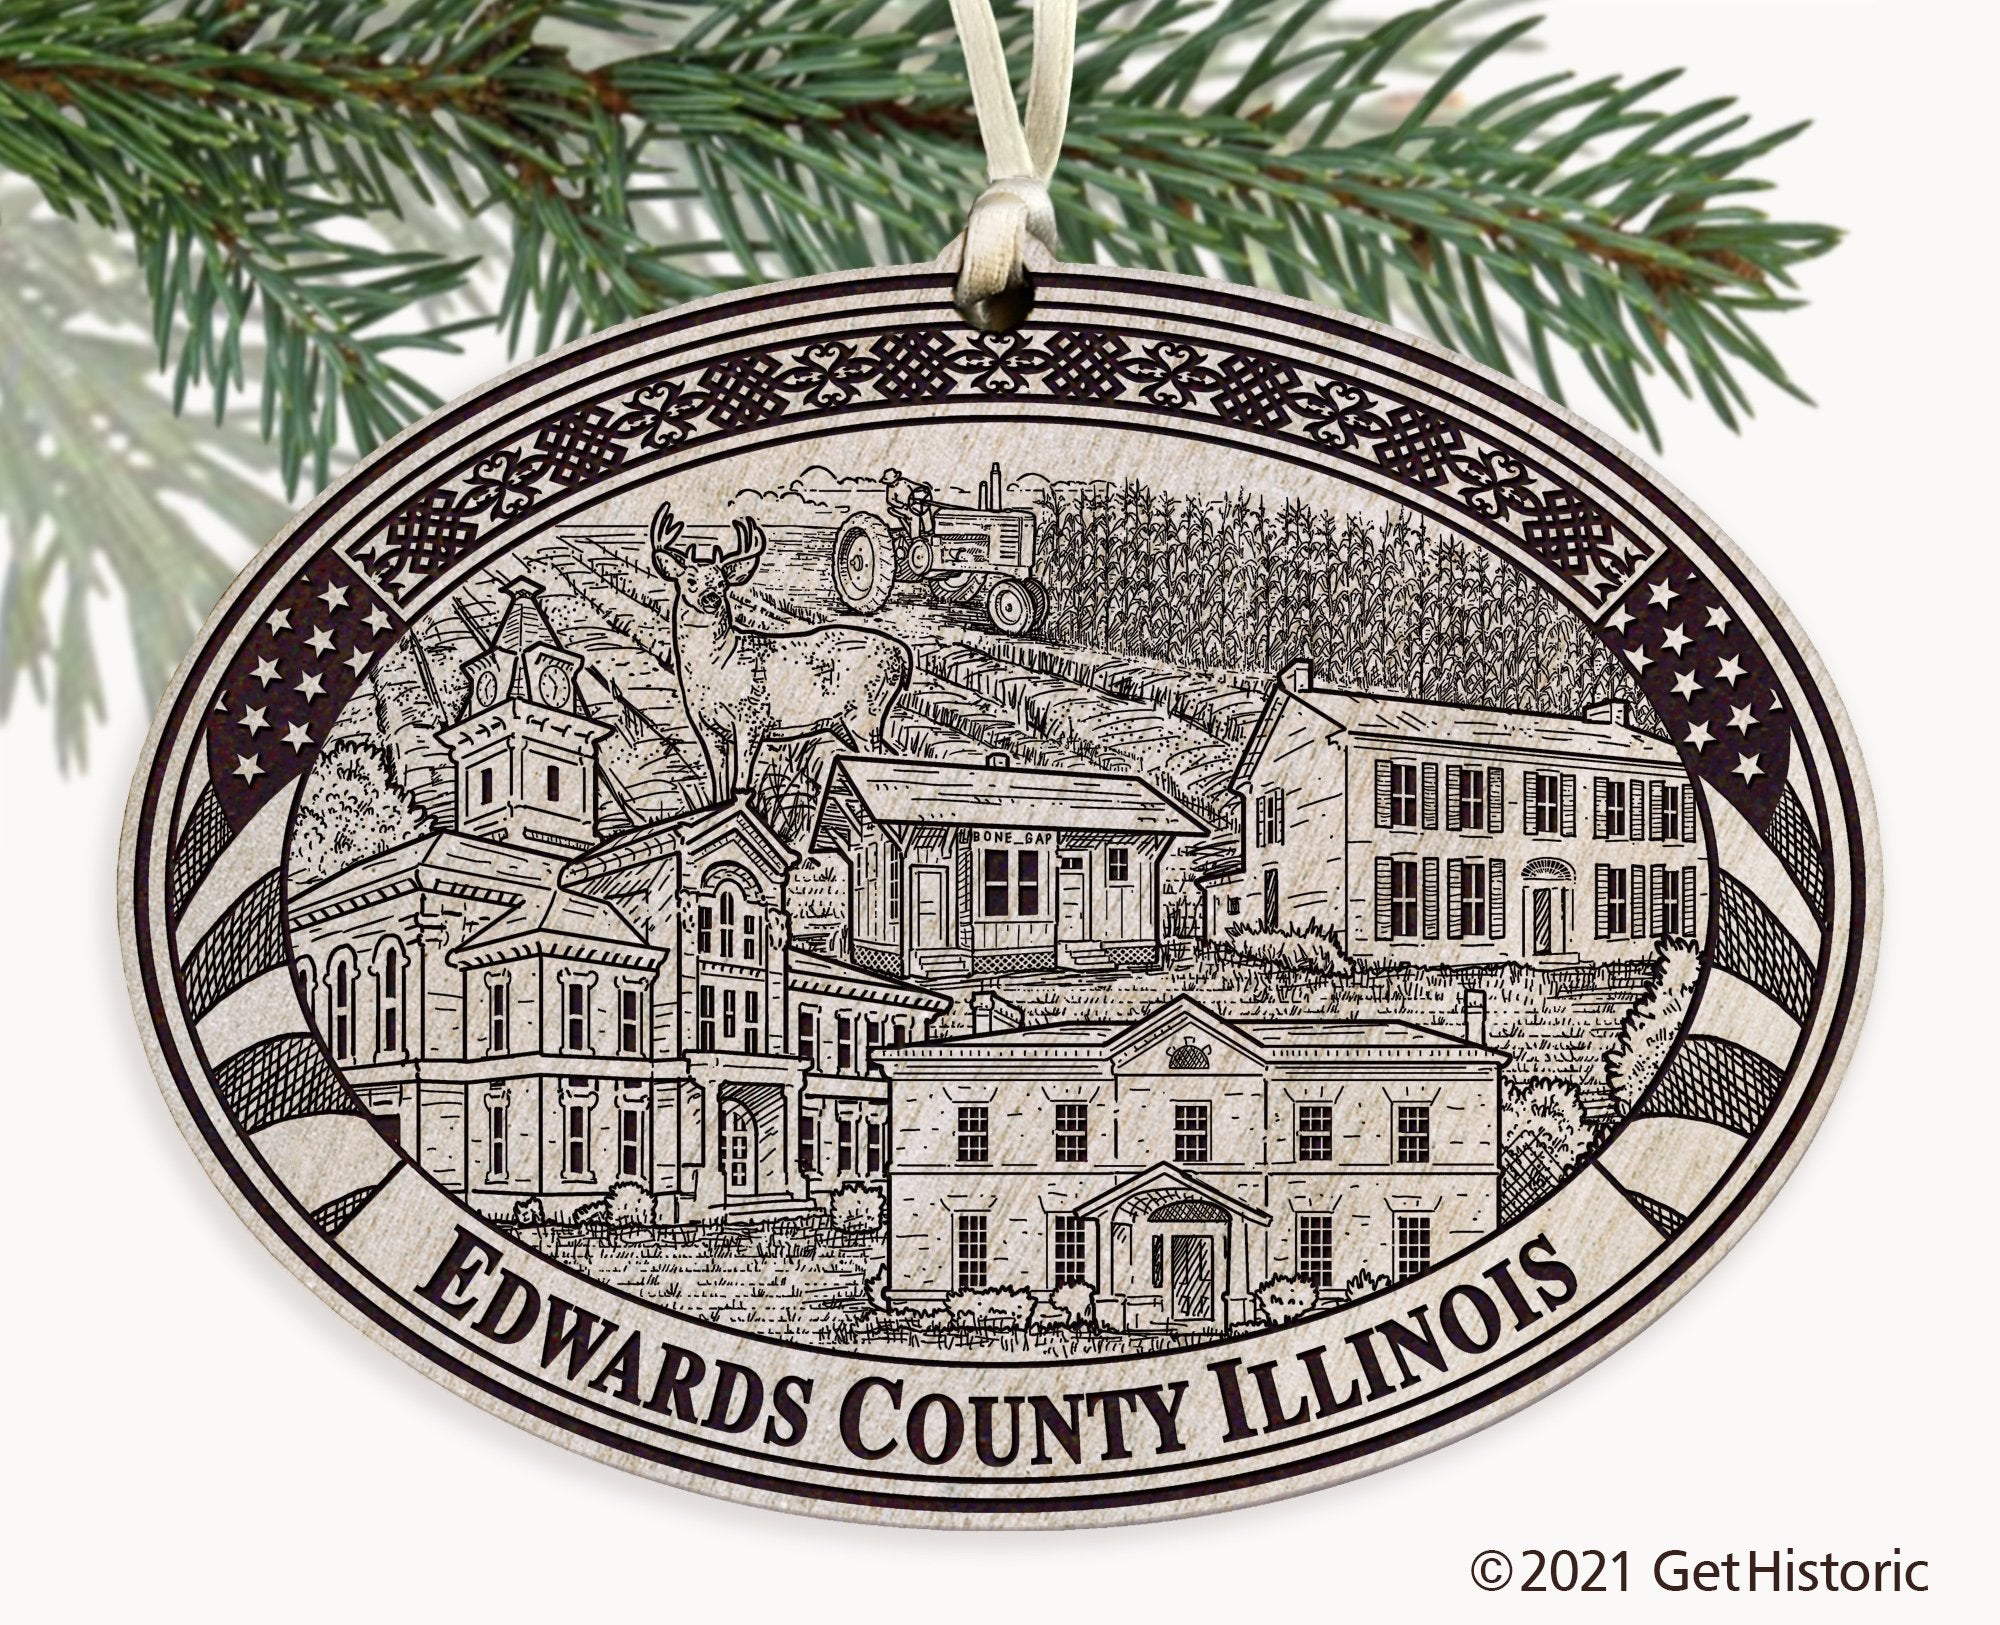 Edwards County Illinois Engraved Ornament